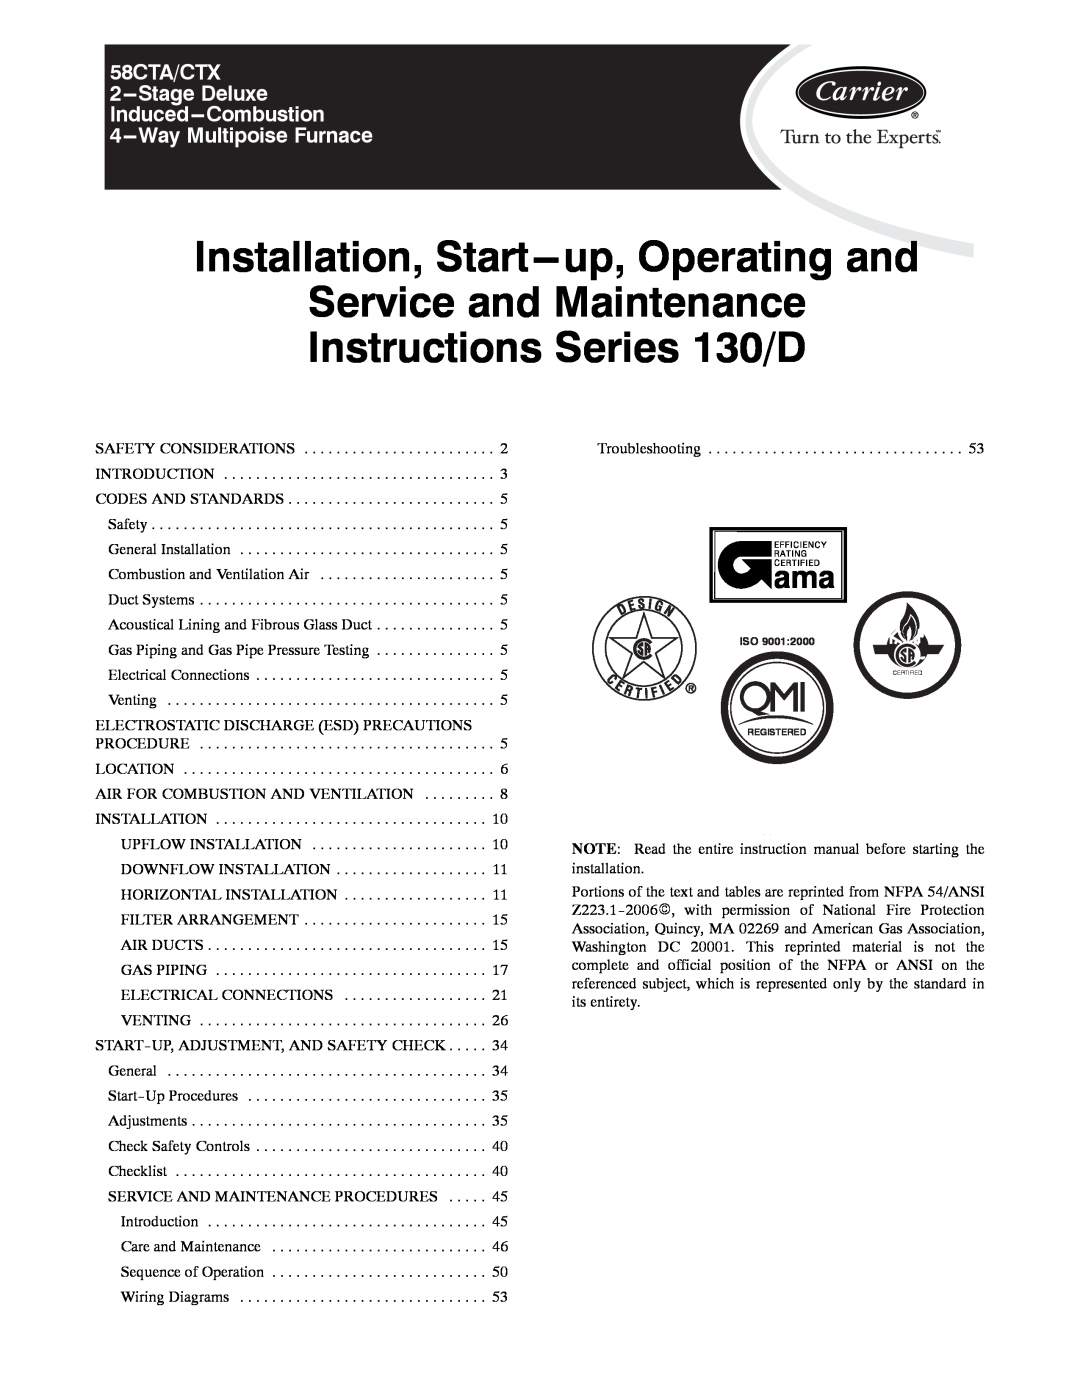 Carrier 58CTA/CTX instruction manual Installation, Start---up,Operating and, WayMultipoise Furnace 